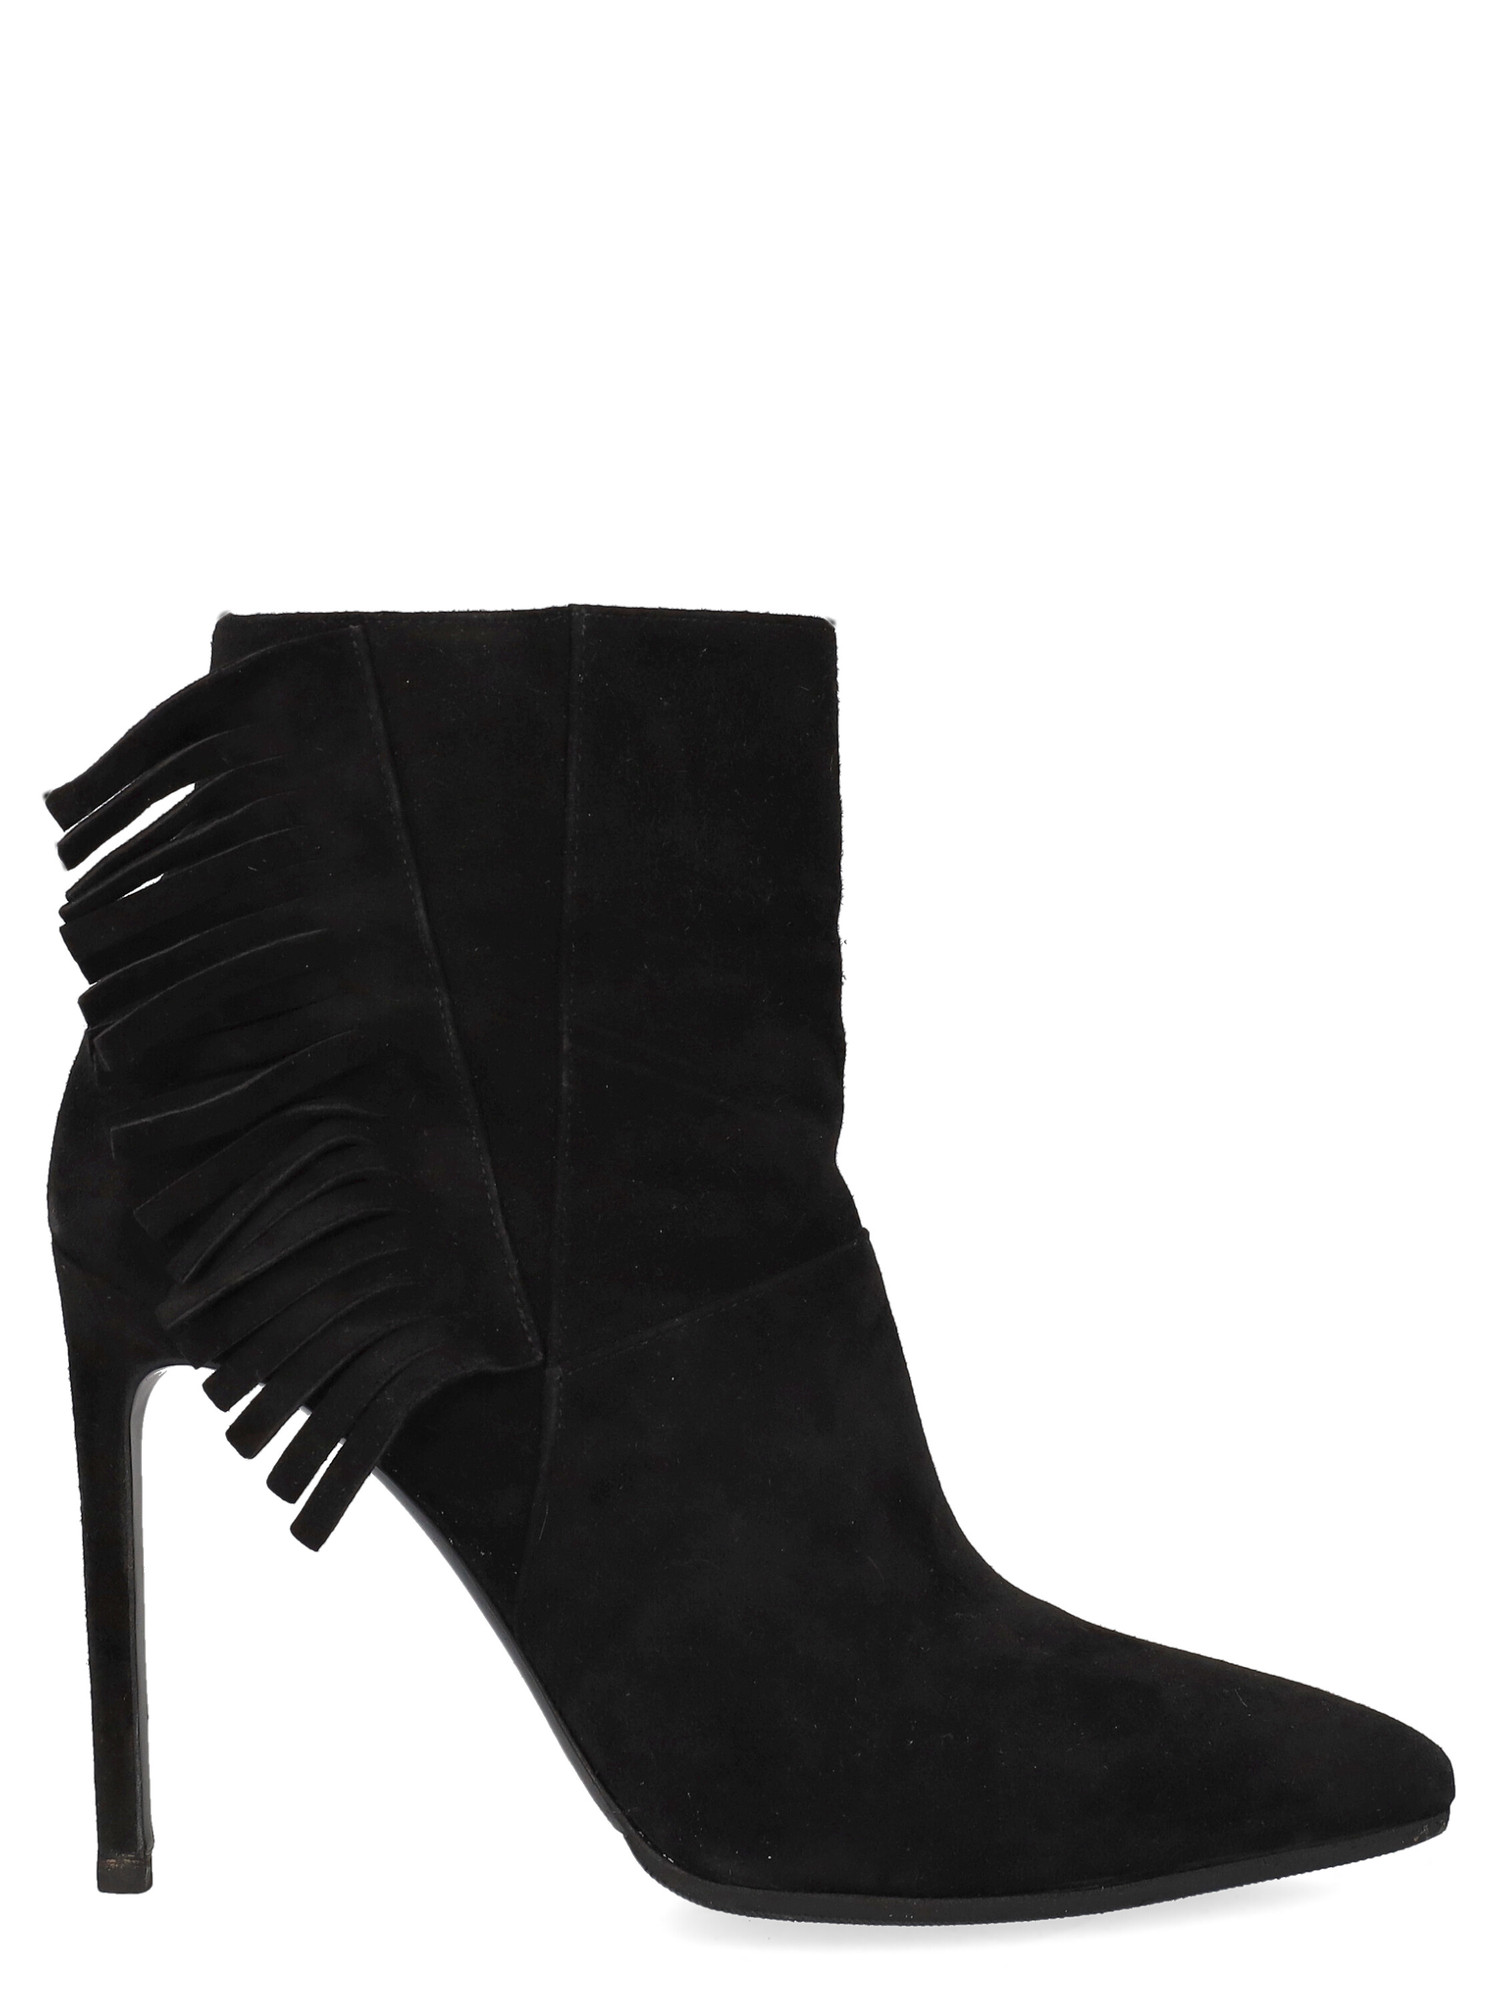 Pre-owned Saint Laurent Women's Ankle Boots -  - In Black Leather